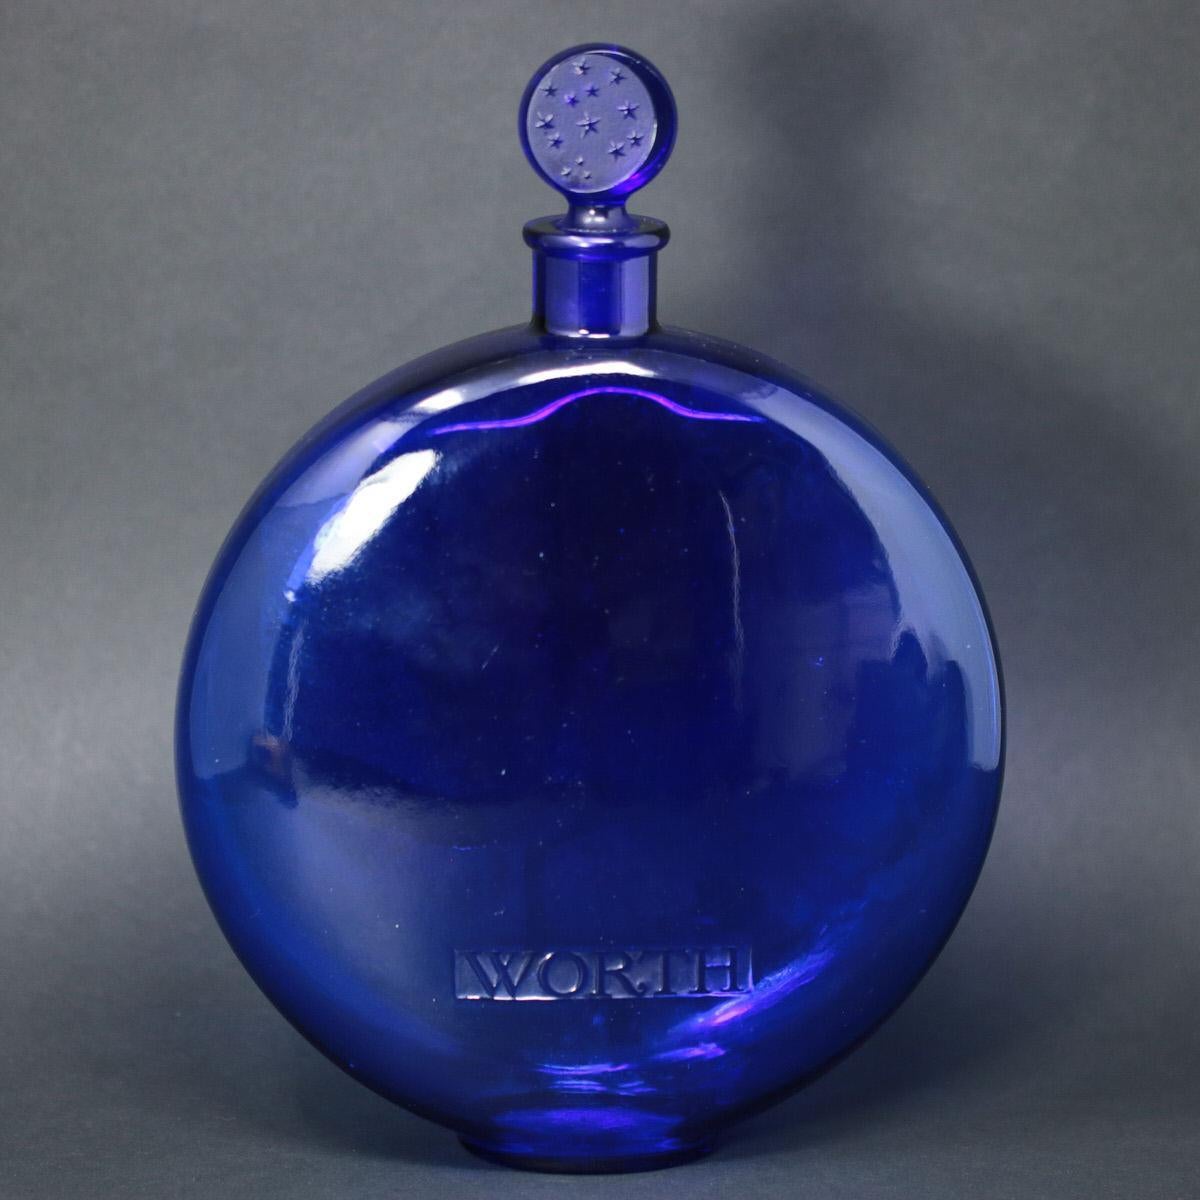 Rene Lalique blue, clear glass 'Dans La Nuit' perfume bottle. Stars and moon stopper. Moulded perfume maker mark, 'WORTH', to the side. Moulded makers mark, 'R. LALIQUE', to the underside. Engraved number, '688' (?) to the underside. Book reference: